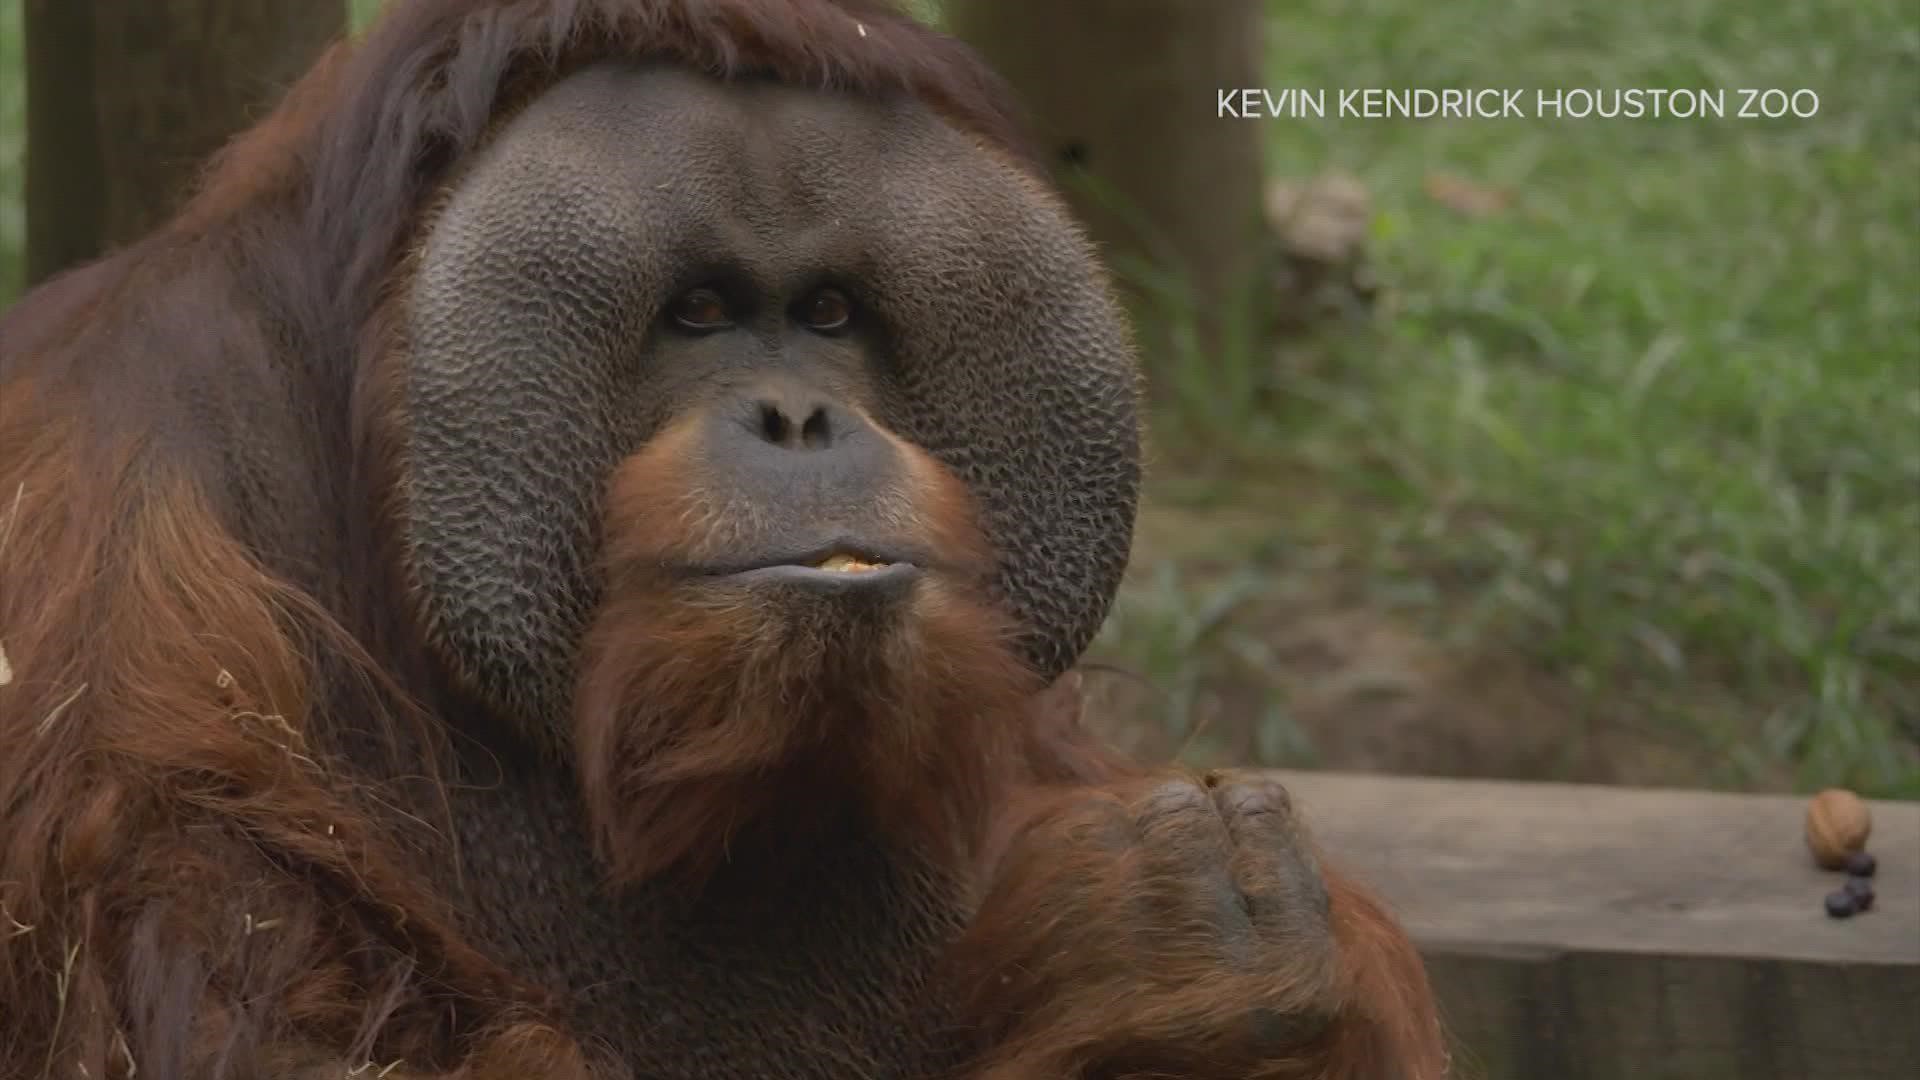 At 45, Rudi is the oldest male orangutan in North America, and the Zoo’s longest resident, arriving back in 1978 when he was only two months old.